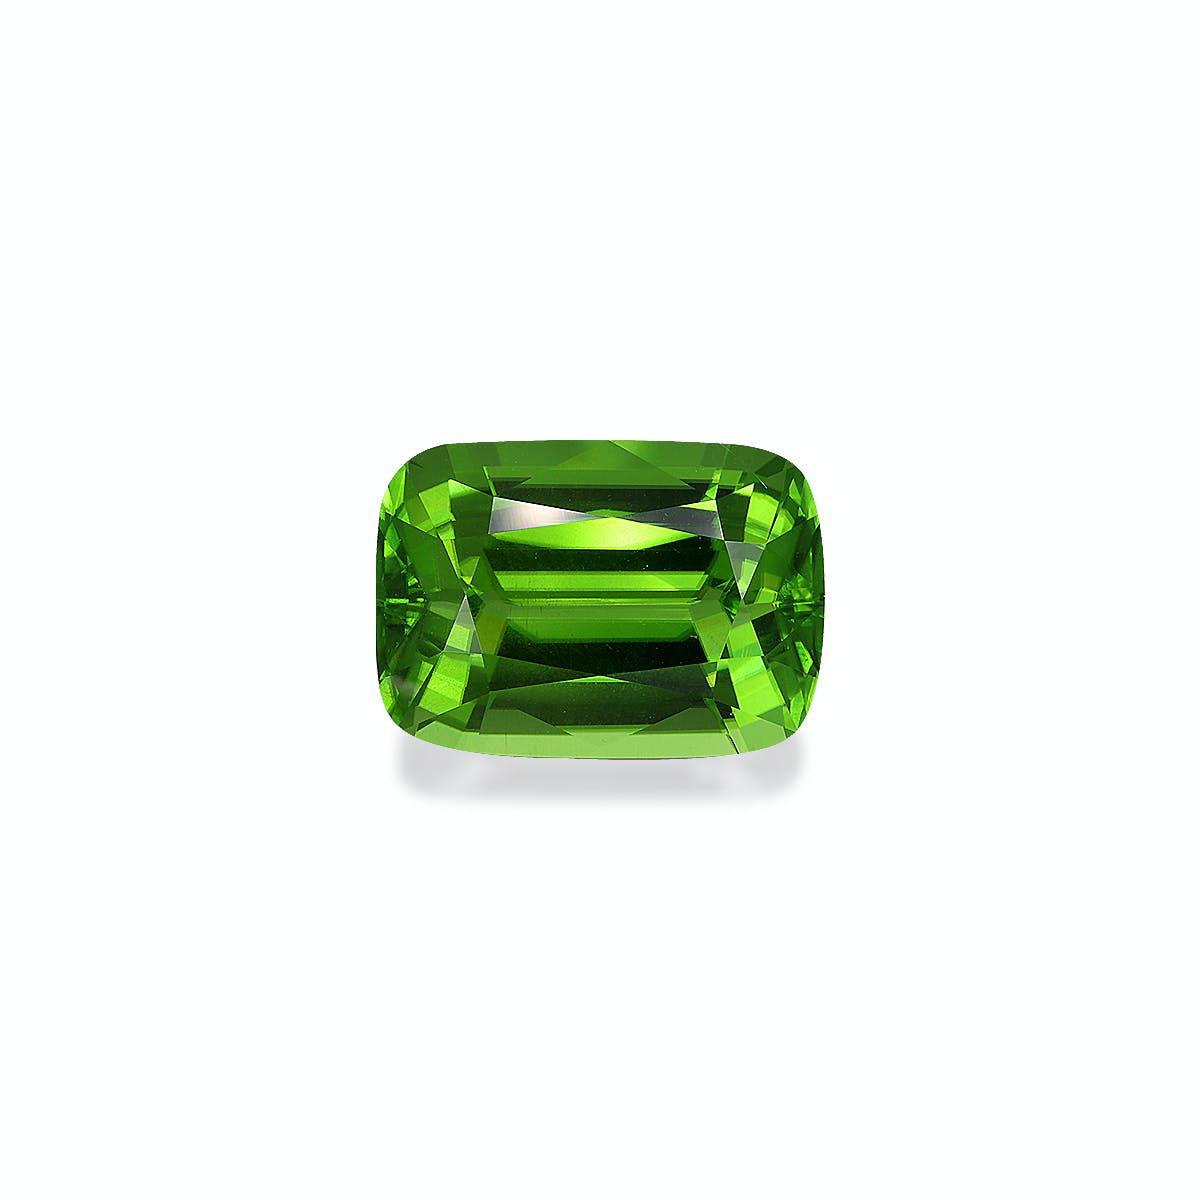 Picture of Vivid Green Peridot 22.22ct (PD0283)